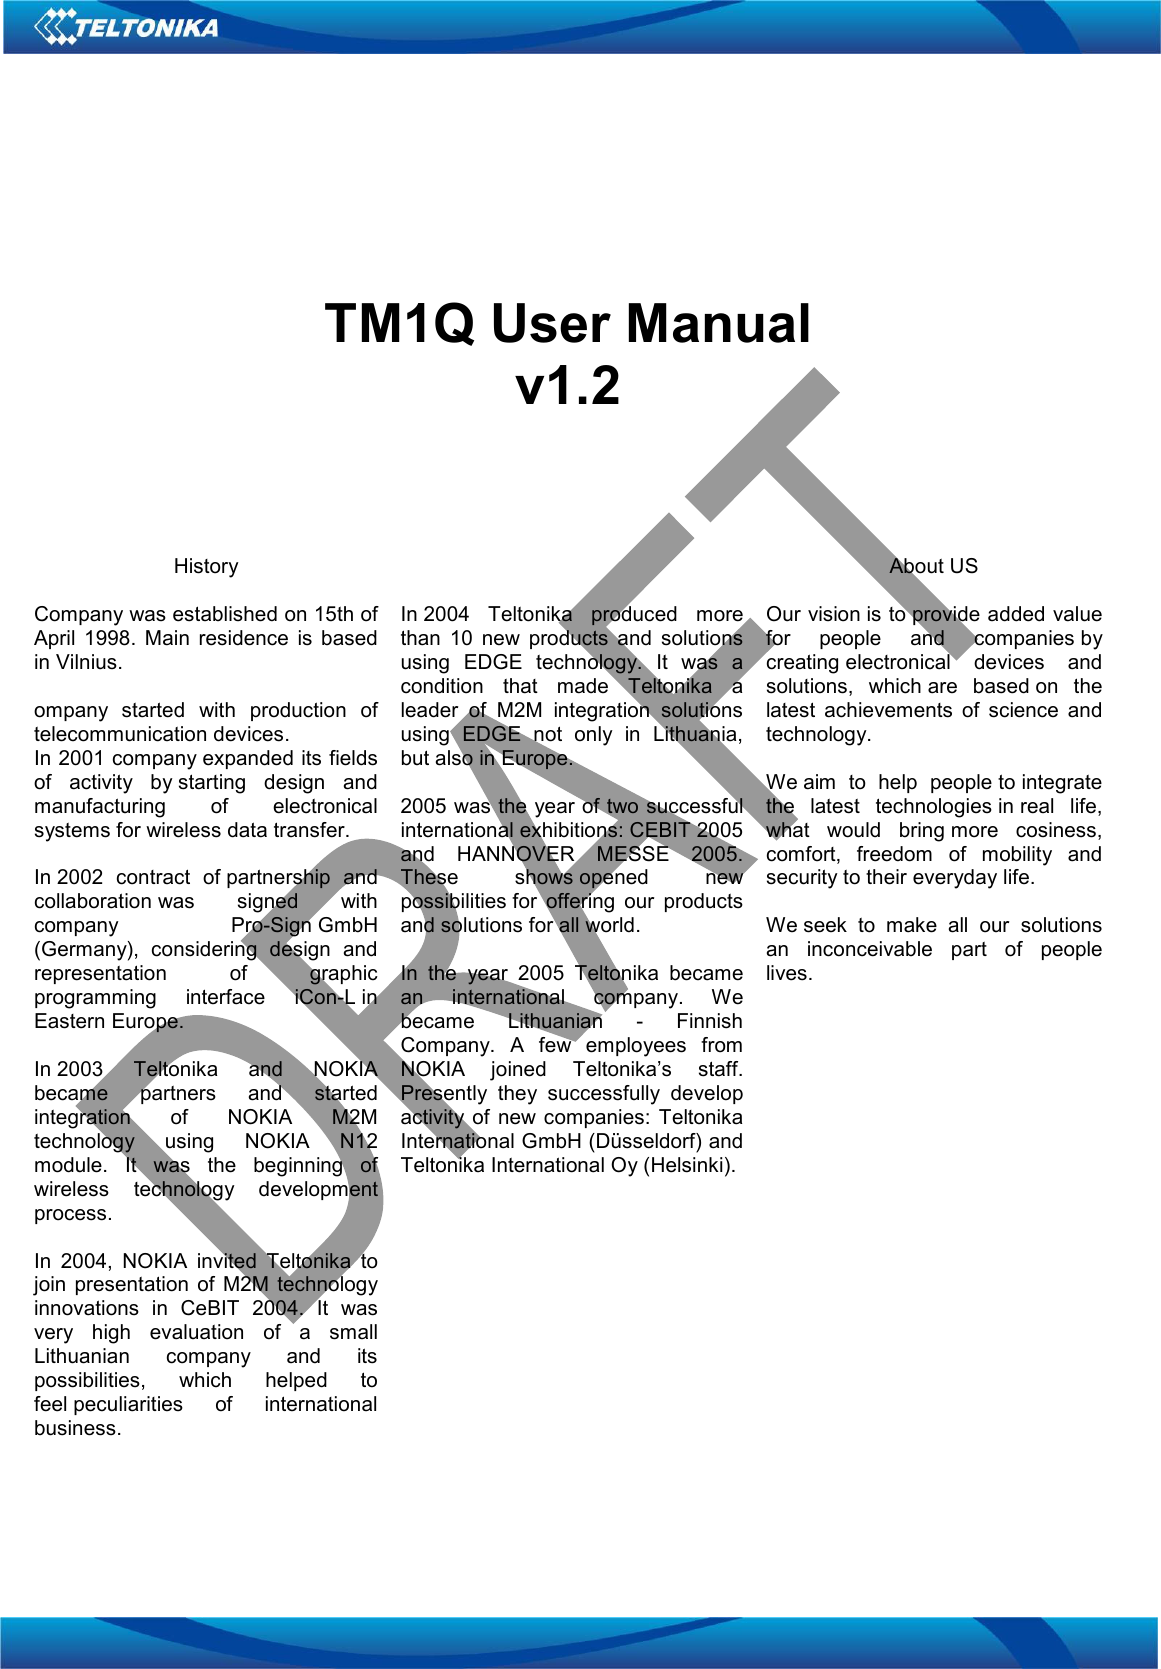        TM1Q User Manual v1.2     History  Company was established on 15th of April  1998.  Main  residence  is  based in Vilnius.  ompany  started  with  production  of telecommunication devices.  In 2001 company expanded its fields of  activity  by starting  design  and manufacturing  of  electronical systems for wireless data transfer.  In 2002  contract  of partnership  and collaboration was  signed  with company  Pro-Sign GmbH (Germany),  considering  design  and representation  of  graphic programming  interface  iCon-L in Eastern Europe.   In 2003  Teltonika  and  NOKIA became  partners  and  started integration  of  NOKIA  M2M technology  using  NOKIA  N12 module.  It  was  the  beginning  of wireless  technology  development process.  In  2004,  NOKIA  invited  Teltonika  to join  presentation  of  M2M technology innovations  in  CeBIT  2004.  It  was very  high  evaluation  of  a  small Lithuanian  company  and  its possibilities,  which  helped  to feel peculiarities  of  international business.    In 2004  Teltonika  produced  more than  10  new  products  and  solutions using  EDGE  technology.  It  was  a condition  that  made  Teltonika  a leader  of  M2M  integration  solutions using  EDGE  not  only  in  Lithuania, but also in Europe.  2005 was the year of two successful international exhibitions: CEBIT 2005 and  HANNOVER  MESSE  2005. These  shows opened  new possibilities for  offering  our  products and solutions for all world.   In  the  year  2005  Teltonika  became an  international  company.  We became  Lithuanian  -  Finnish Company.  A  few  employees  from NOKIA  joined  Teltonika’s  staff. Presently  they  successfully  develop activity  of  new companies:  Teltonika International GmbH (Düsseldorf) and Teltonika International Oy (Helsinki). About US  Our vision is to provide added value for  people  and  companies by creating electronical  devices  and solutions,  which are  based on  the latest  achievements  of  science  and technology.  We aim  to  help  people to integrate the  latest  technologies in real  life, what  would  bring more  cosiness, comfort,  freedom  of  mobility  and security to their everyday life.   We seek  to  make  all  our  solutions an  inconceivable  part  of  people lives.    